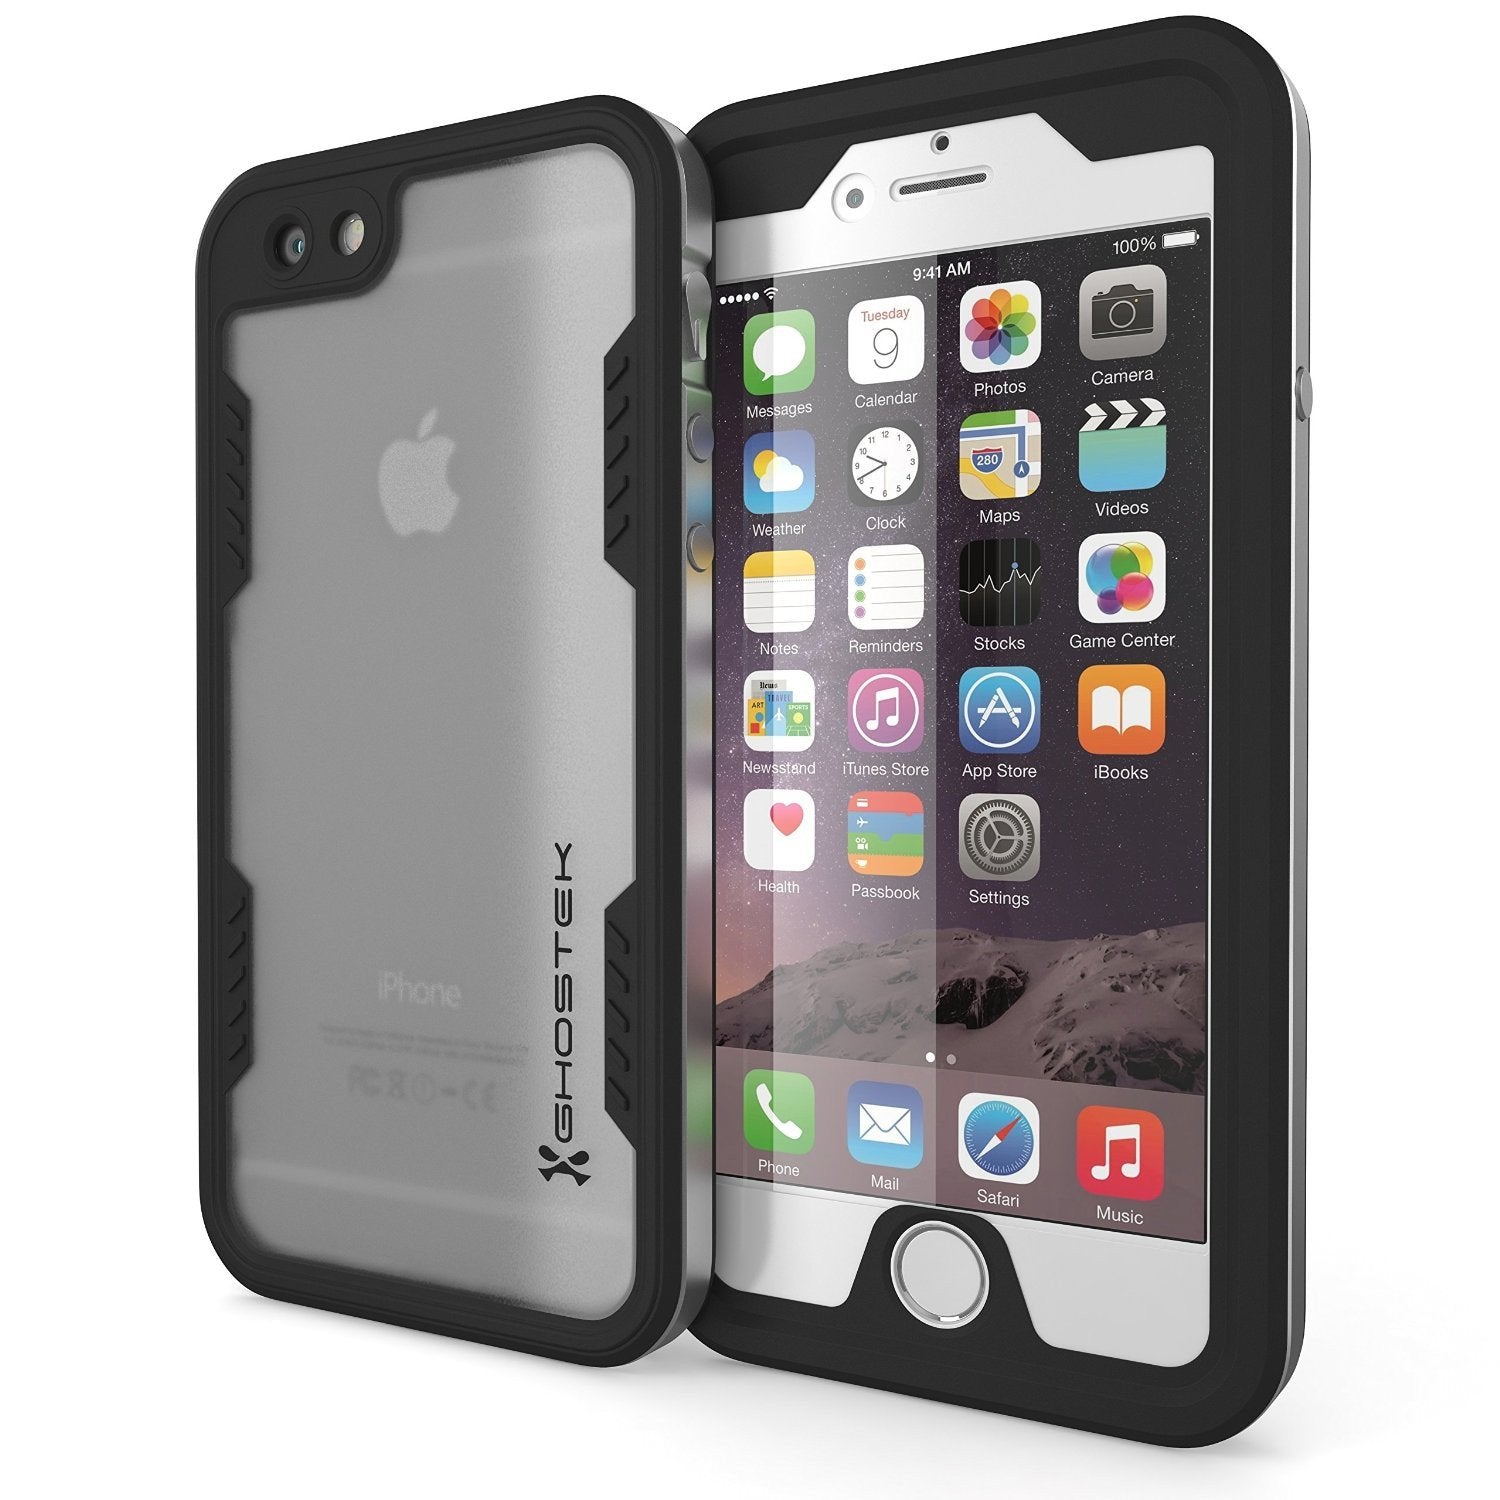 iPhone 6/6S Waterproof Case, Ghostek Atomic 2.0 SILVER W/ Attached Screen Protector | Slim Fit